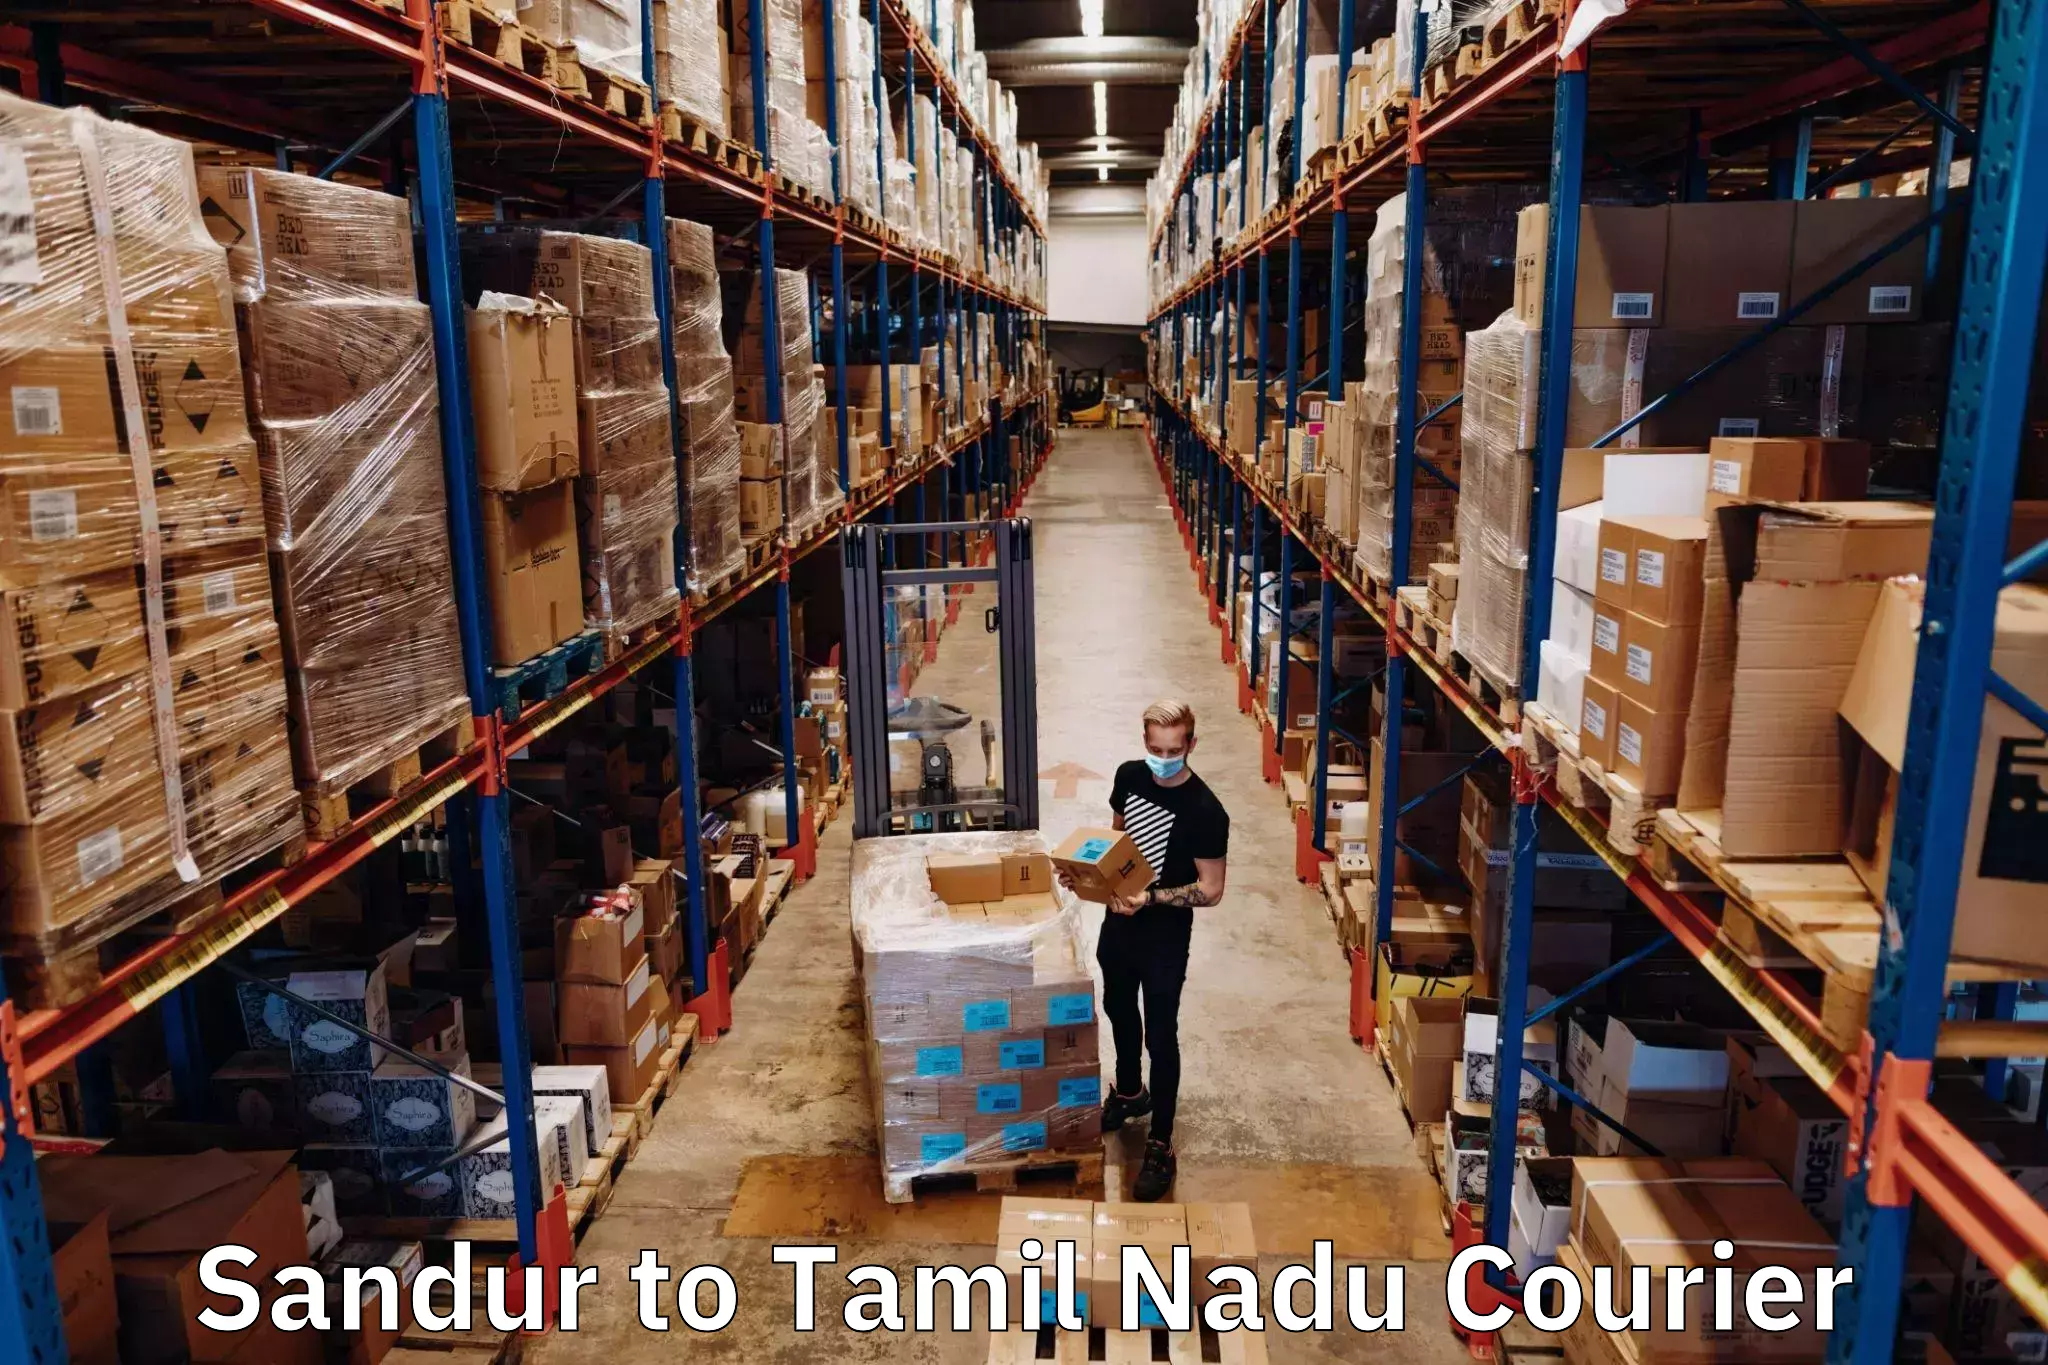 Advanced shipping technology Sandur to Vellore Institute of Technology